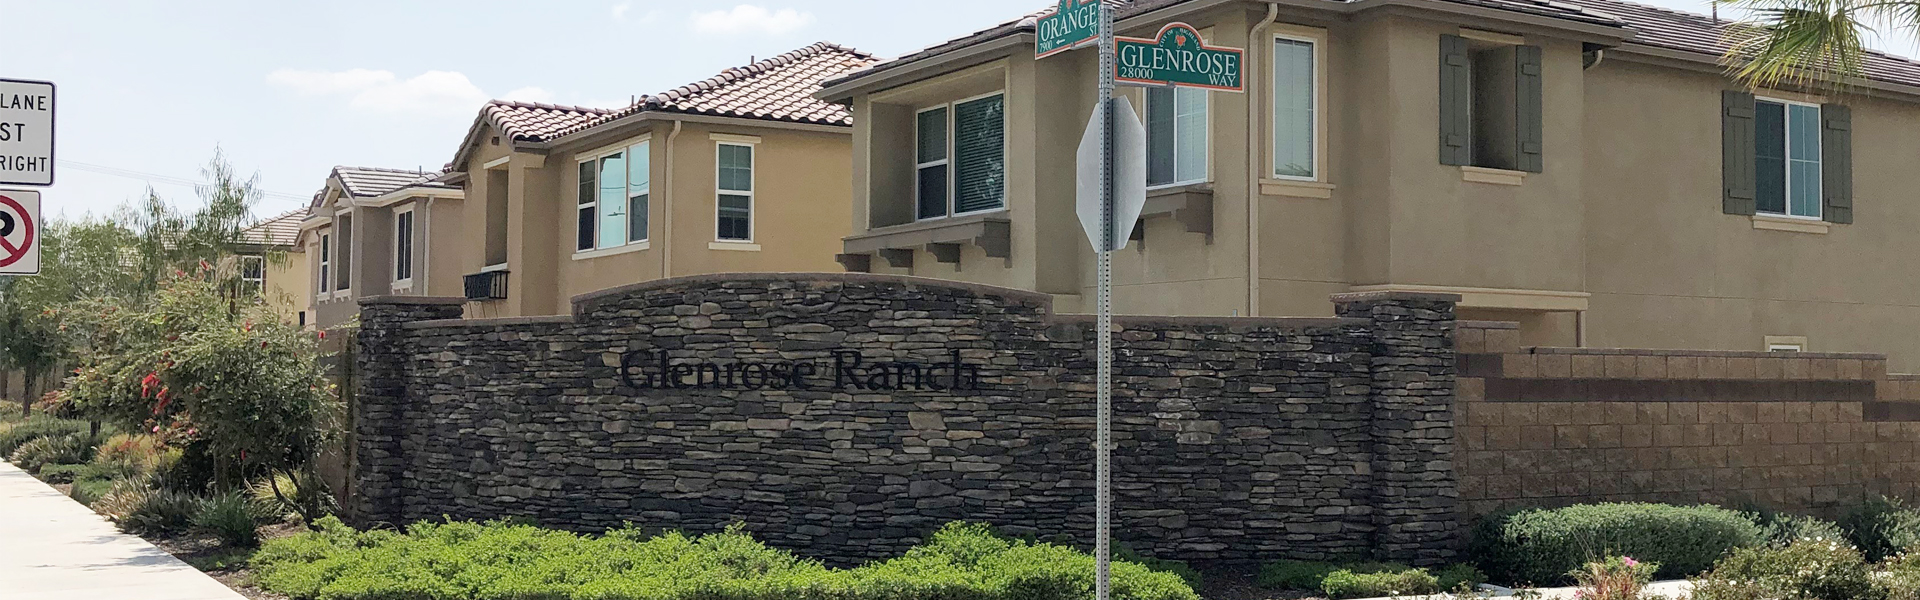 Welcome to Serrano at Glenrose Ranch!